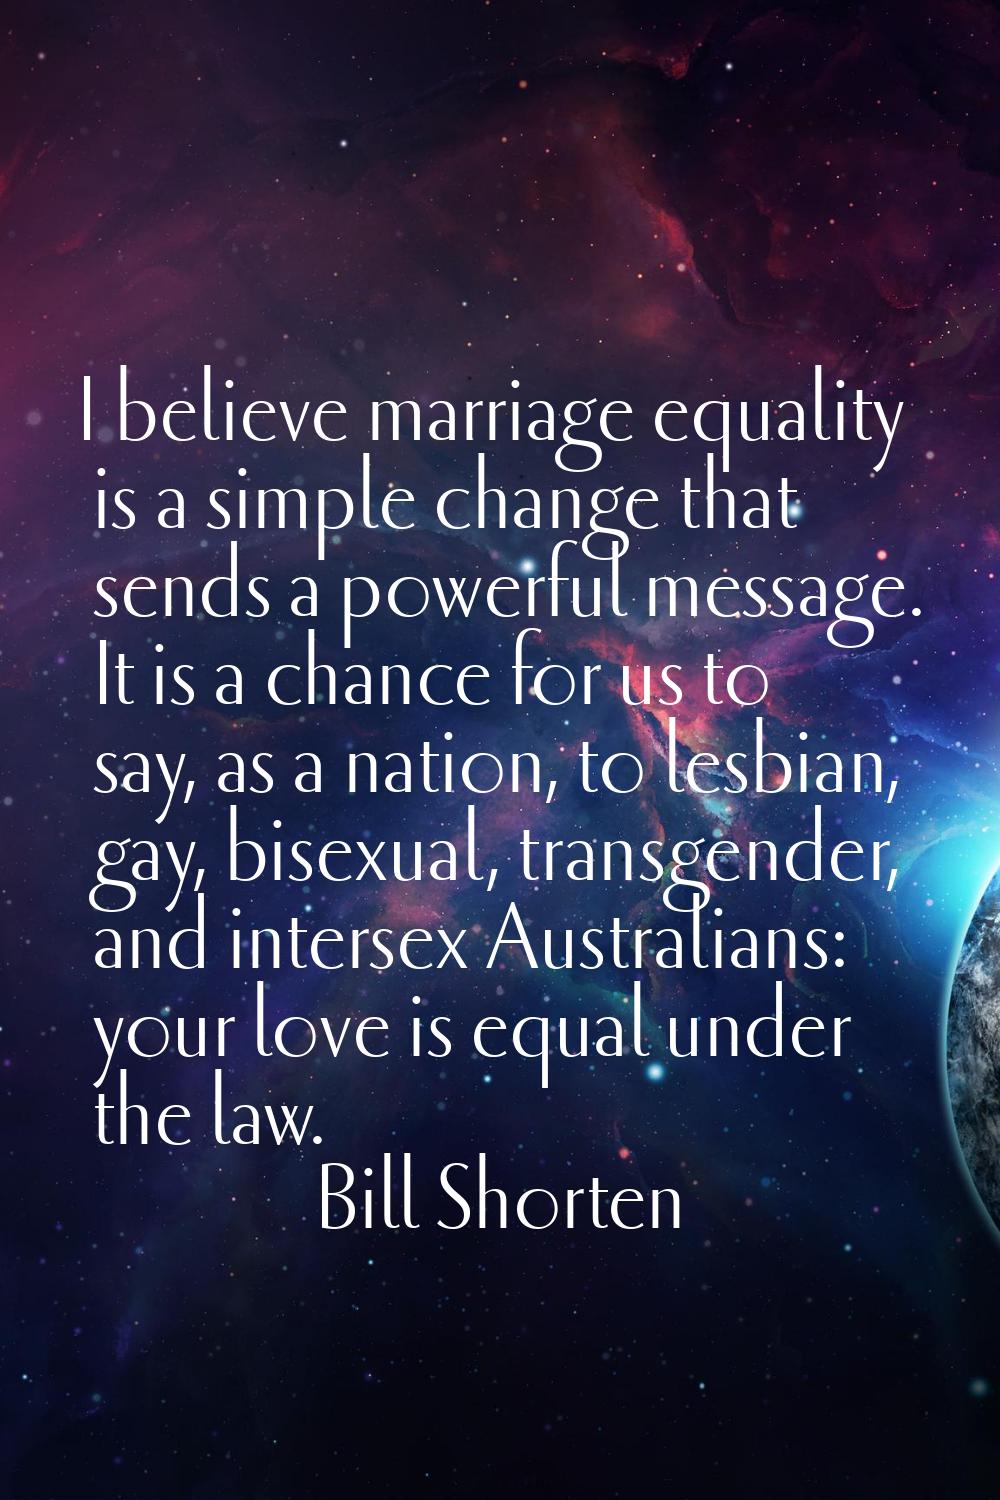 I believe marriage equality is a simple change that sends a powerful message. It is a chance for us